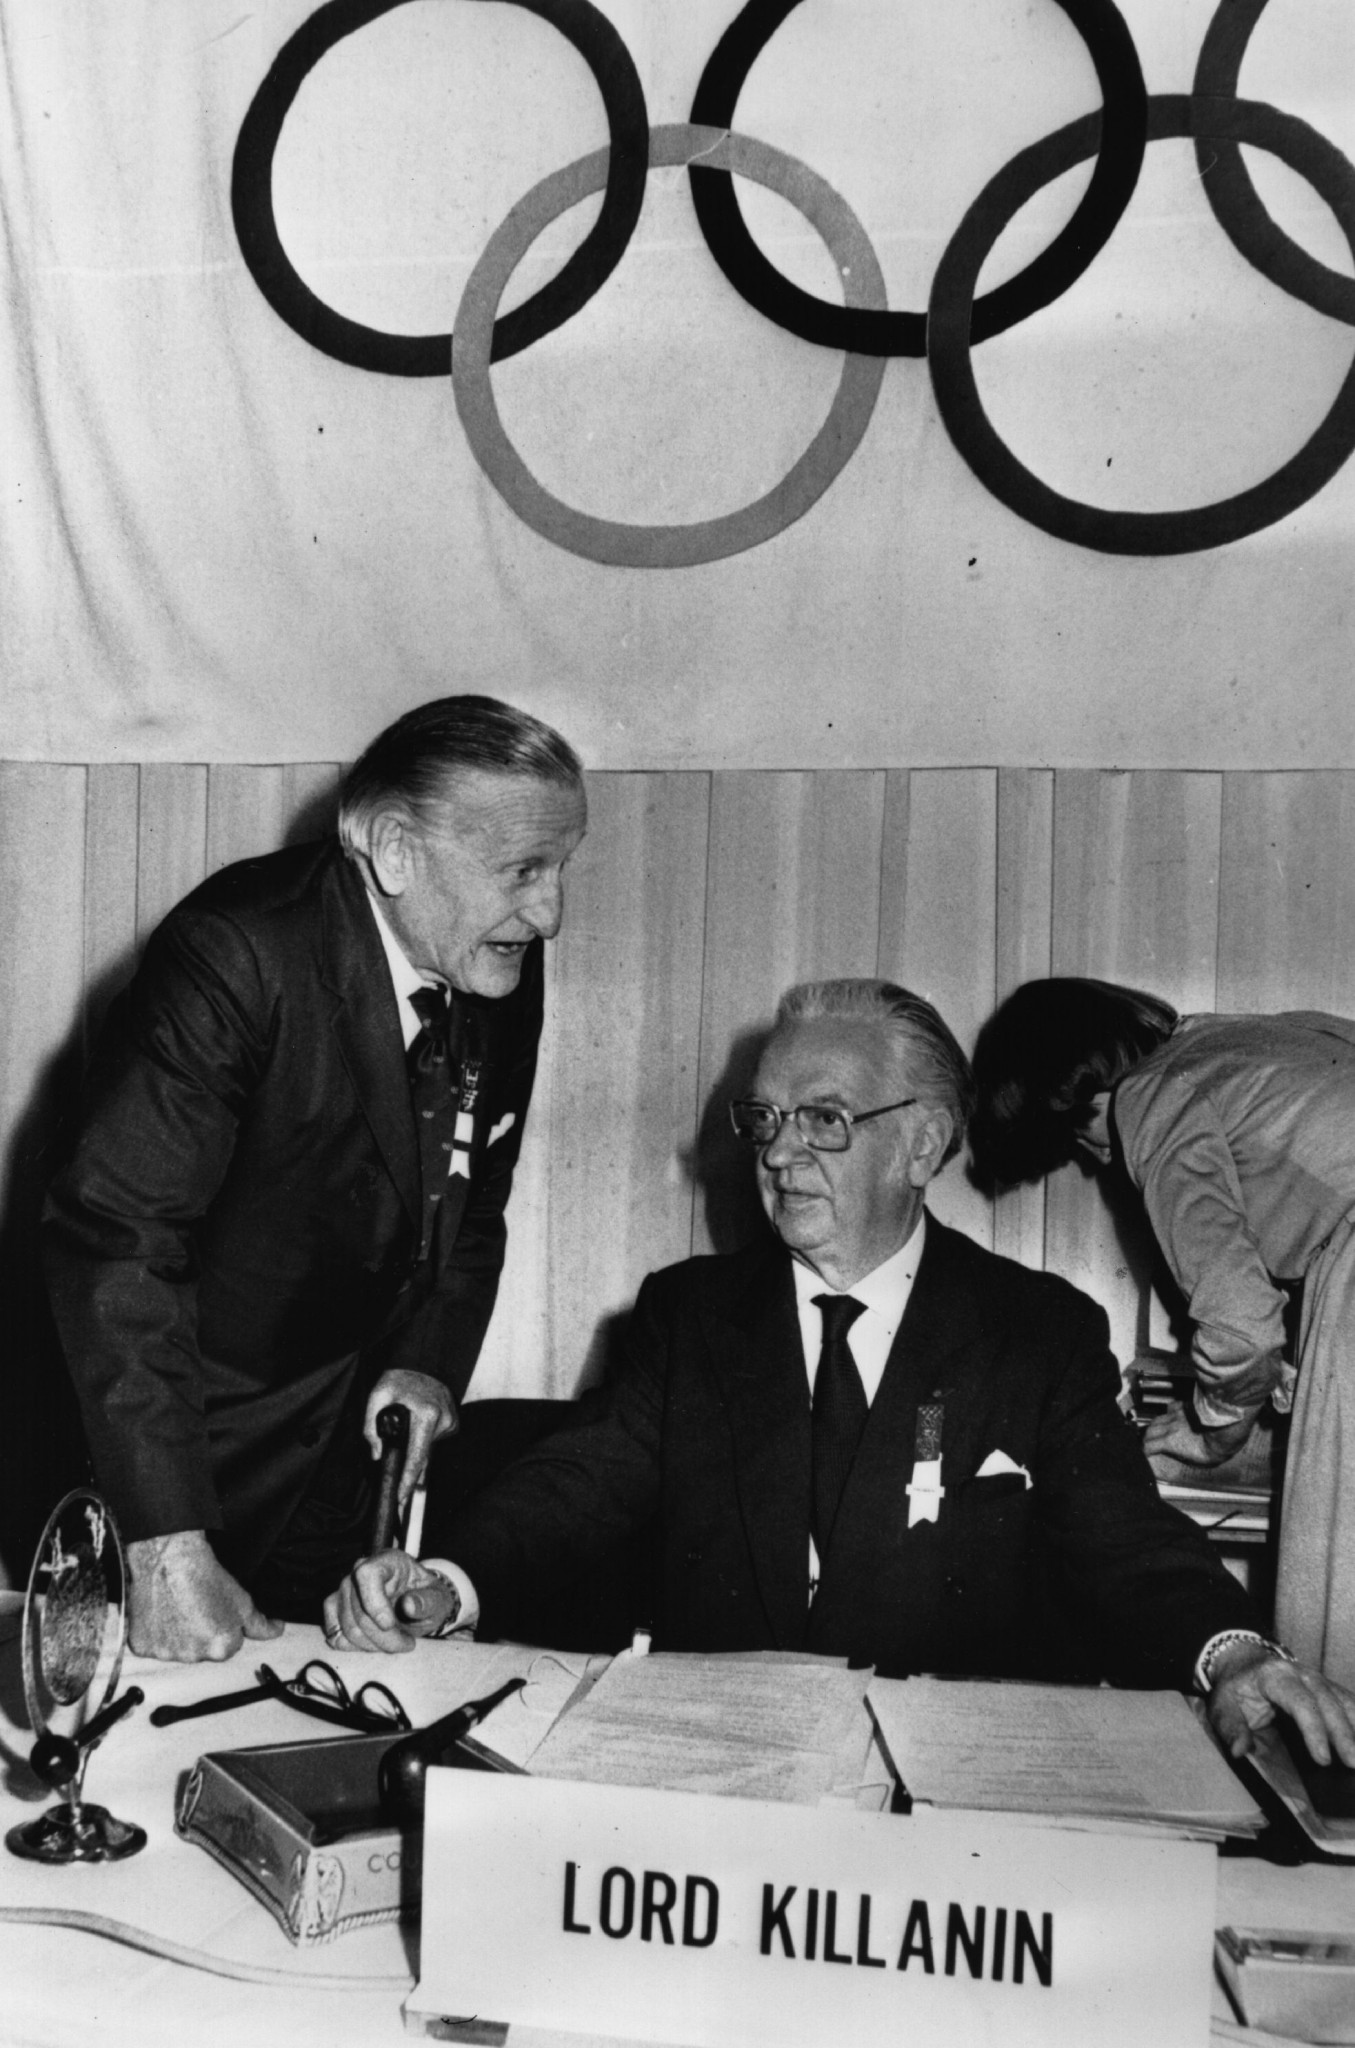 The Marquess of Exeter, left, seen with IOC President Lord Killanin, headed world athletics in an era when professionals were not permitted at the Olympics or international championships ©Getty Images